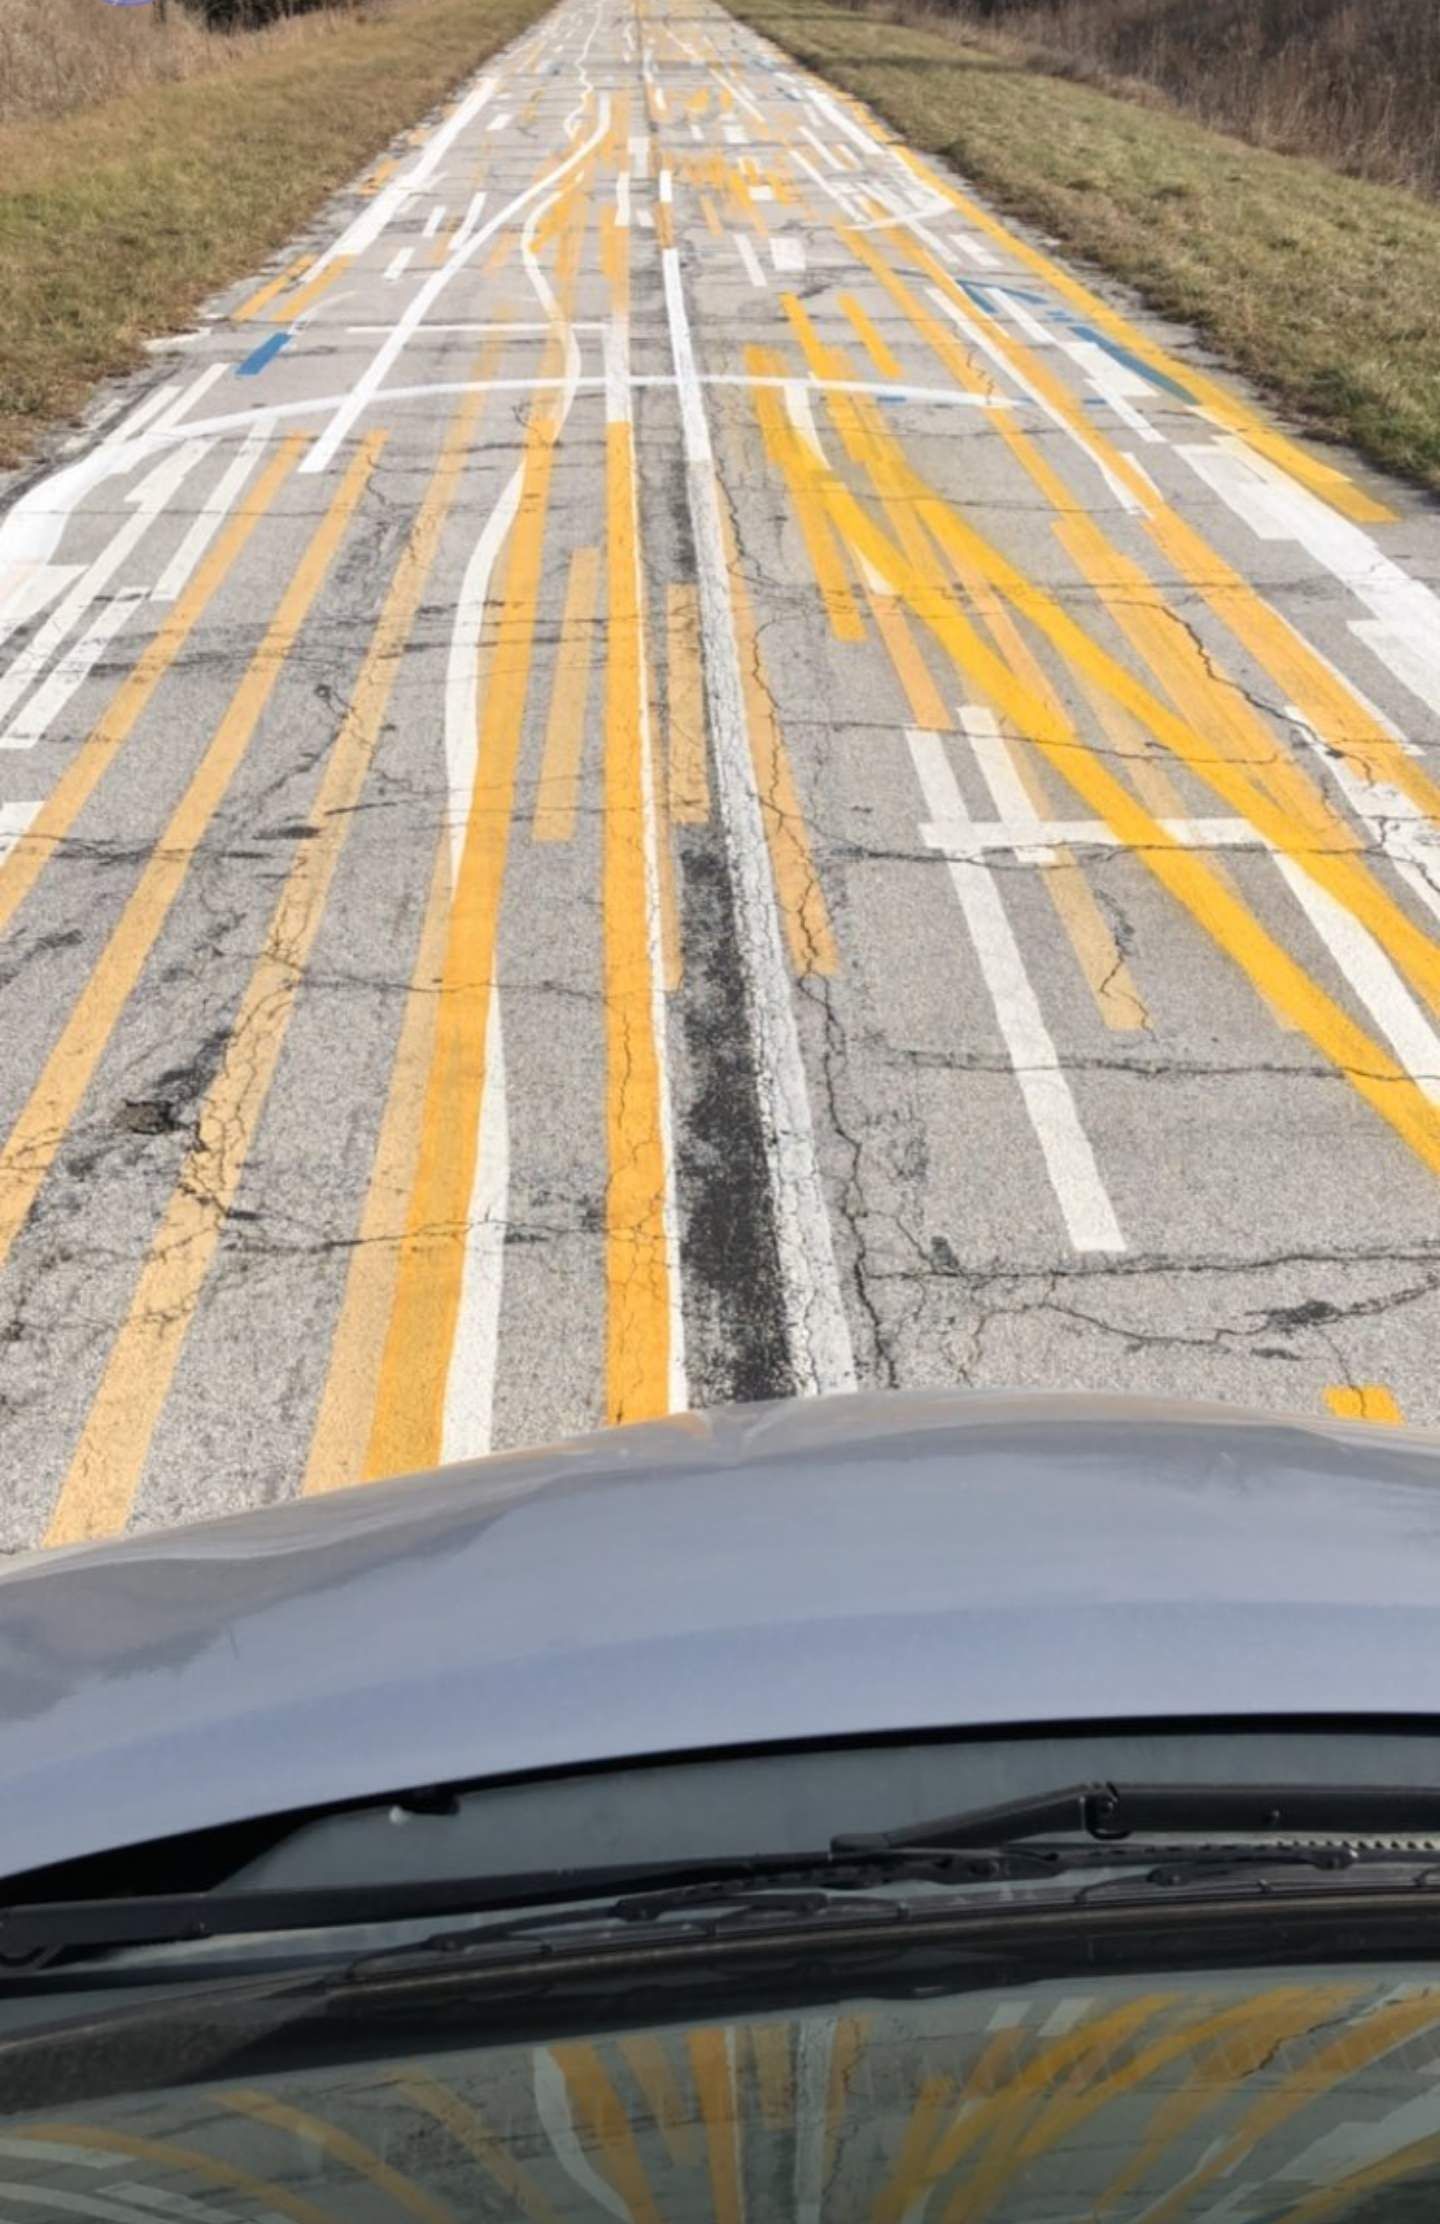 I found the road where they test the line drawer machine